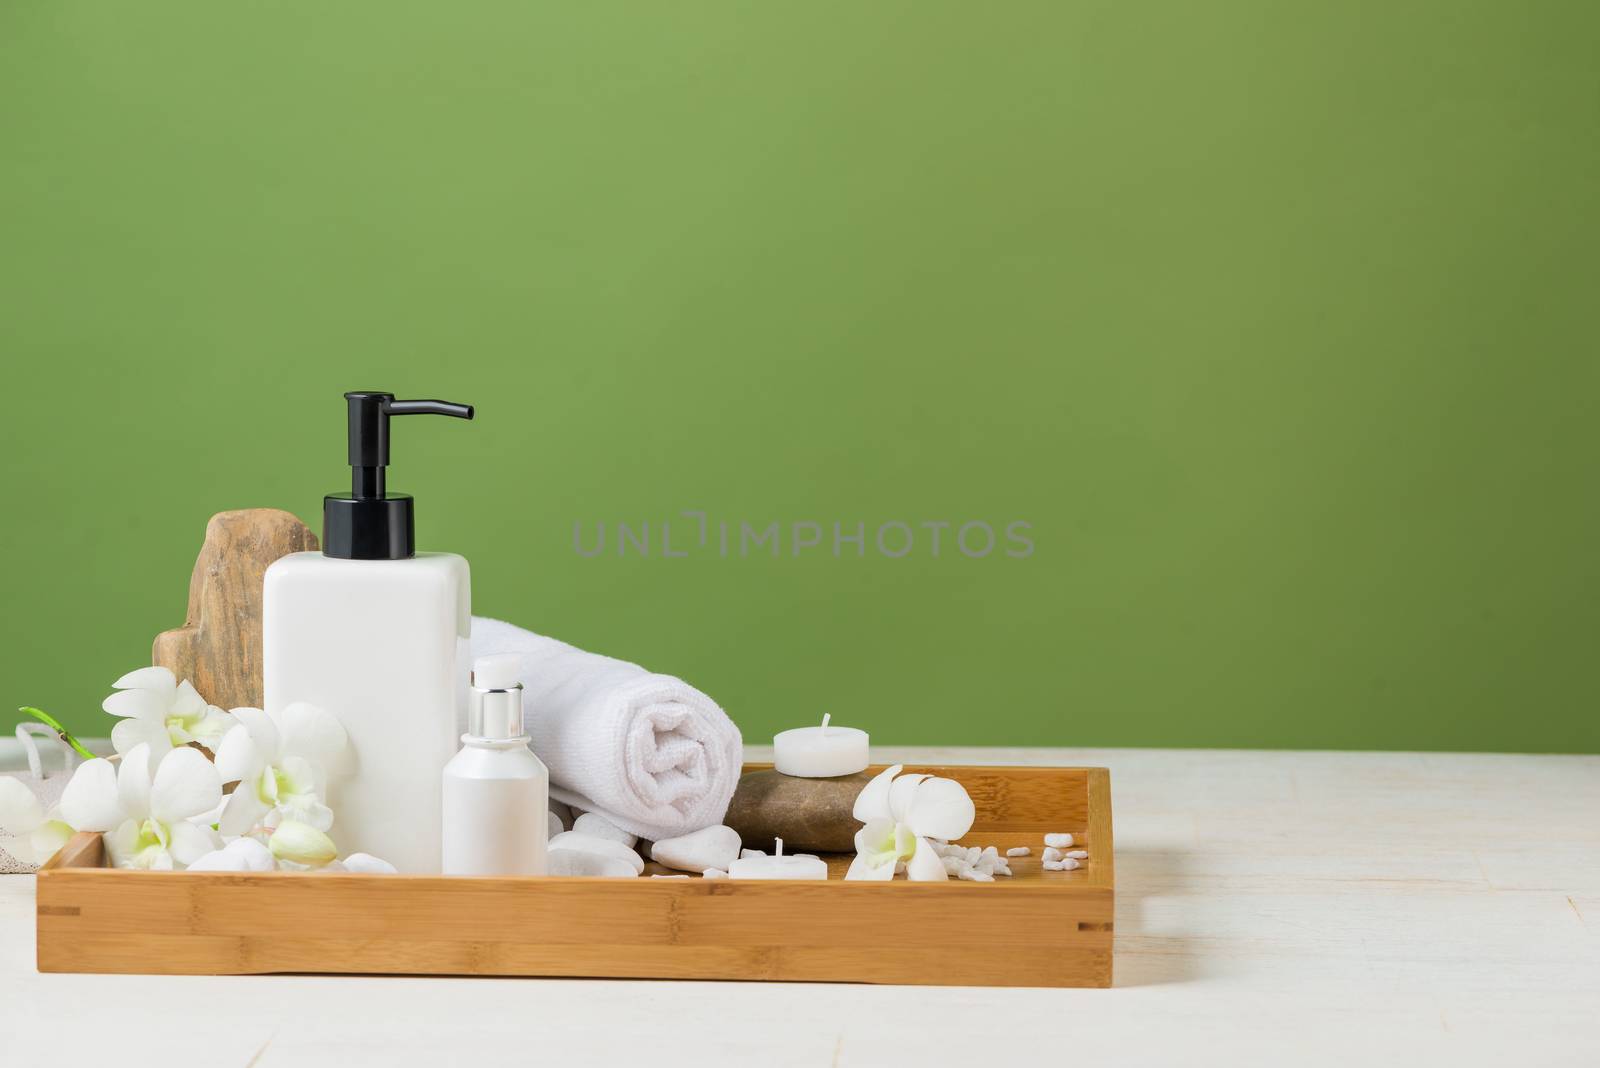 SPA Decoration. Spa composition with cosmetic bottle over green.